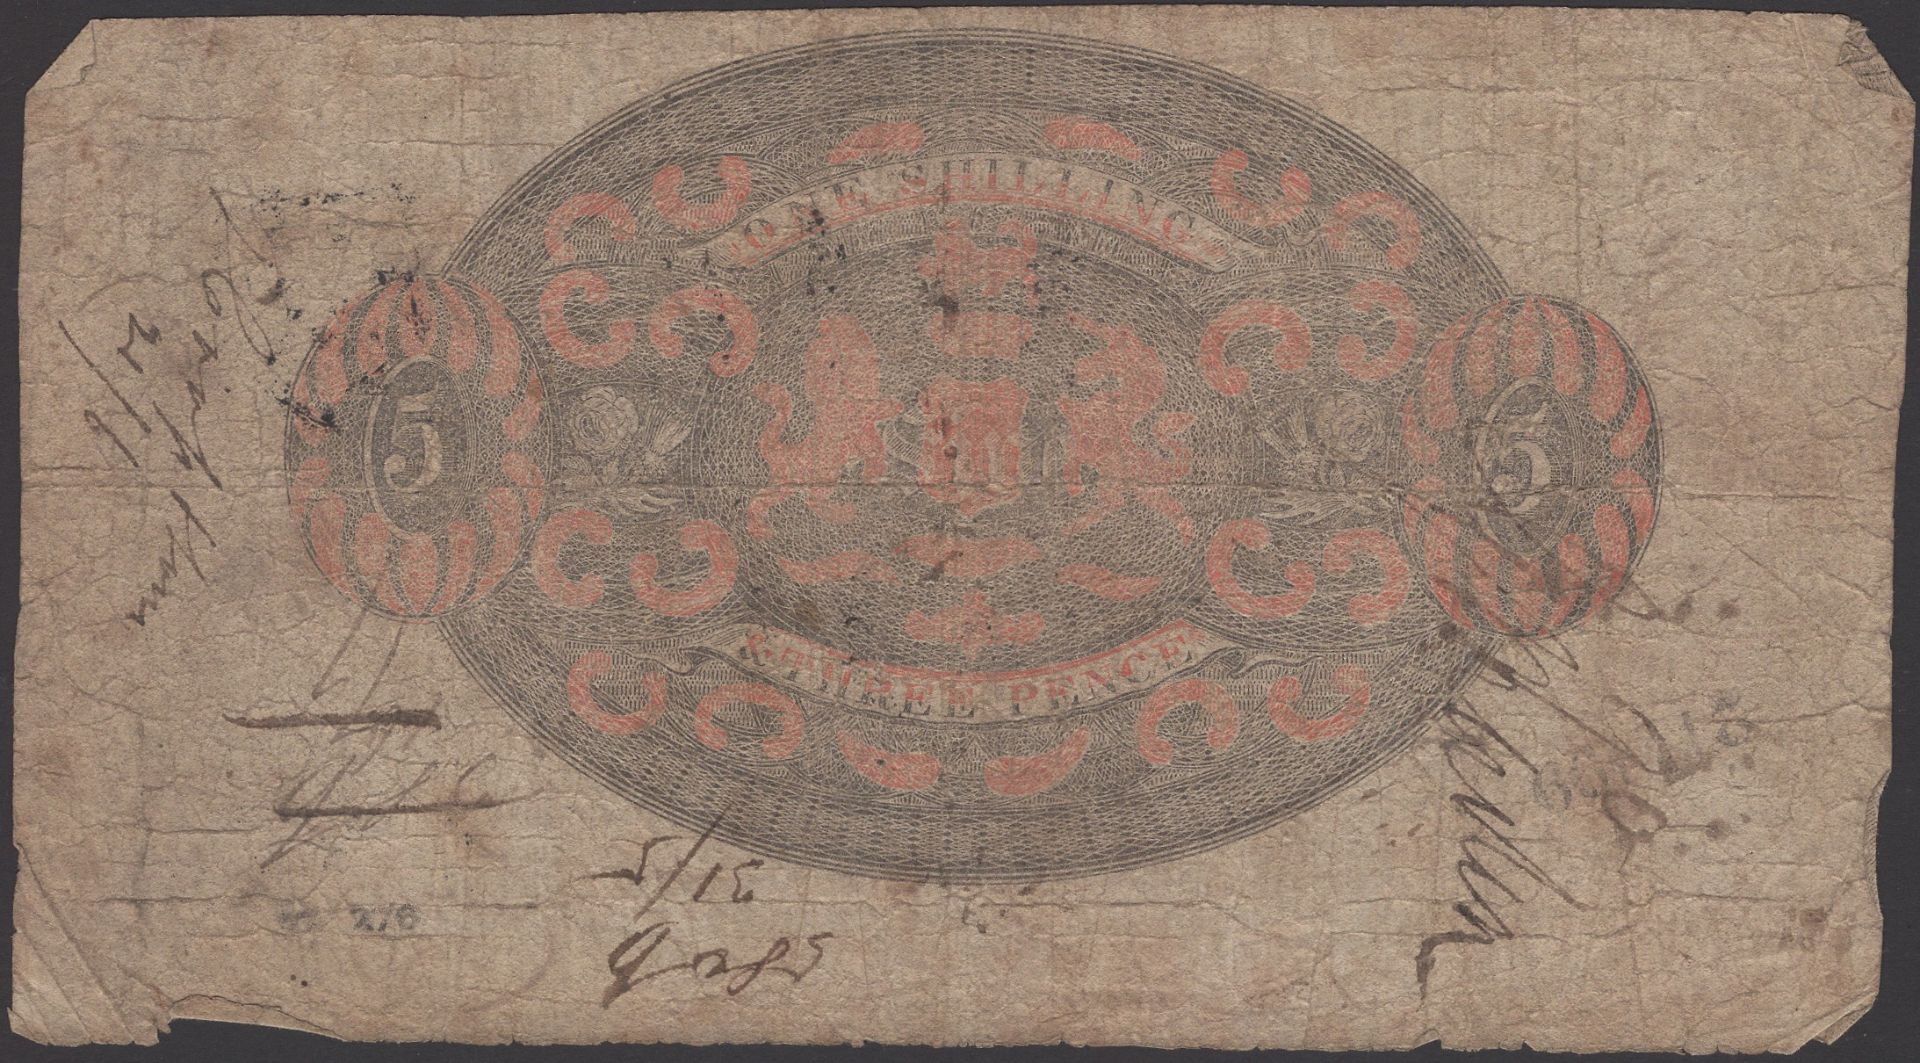 Bath Bank, for Cavenagh, Browne, Bayly and Browne, Â£5, 6 November 1822, serial number B5605,... - Image 2 of 2